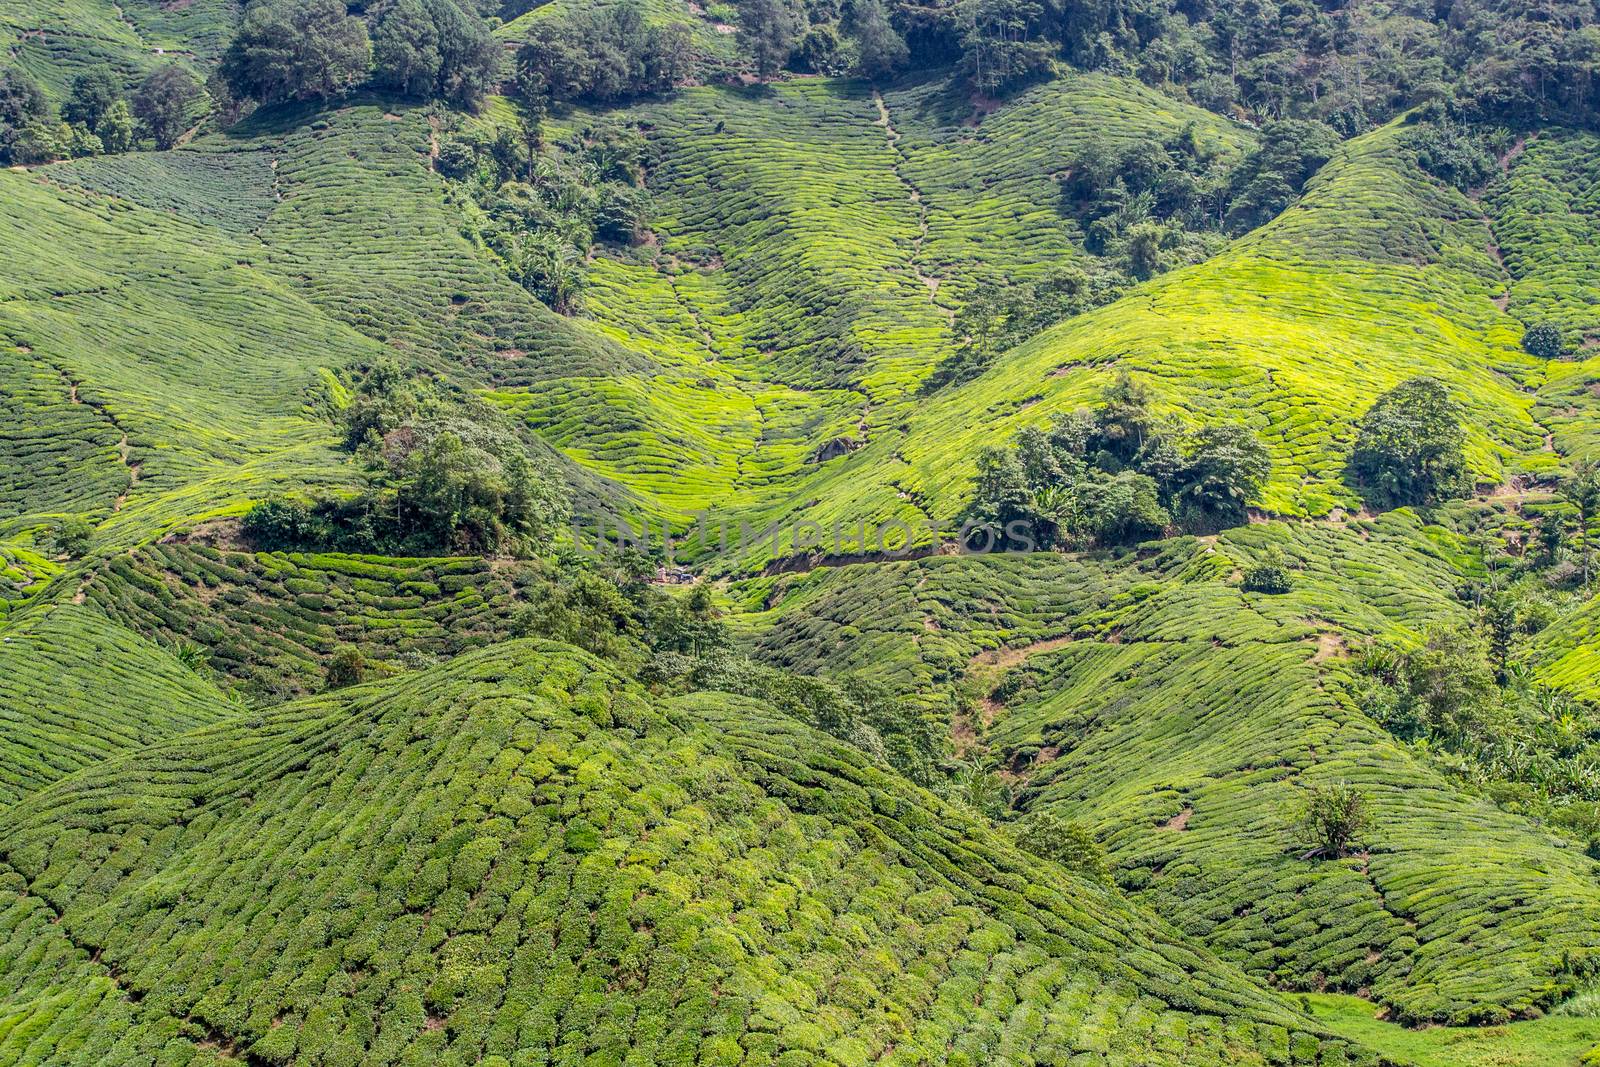 Green tea plantations of Cameron Highlands in Malaysia. by kb79